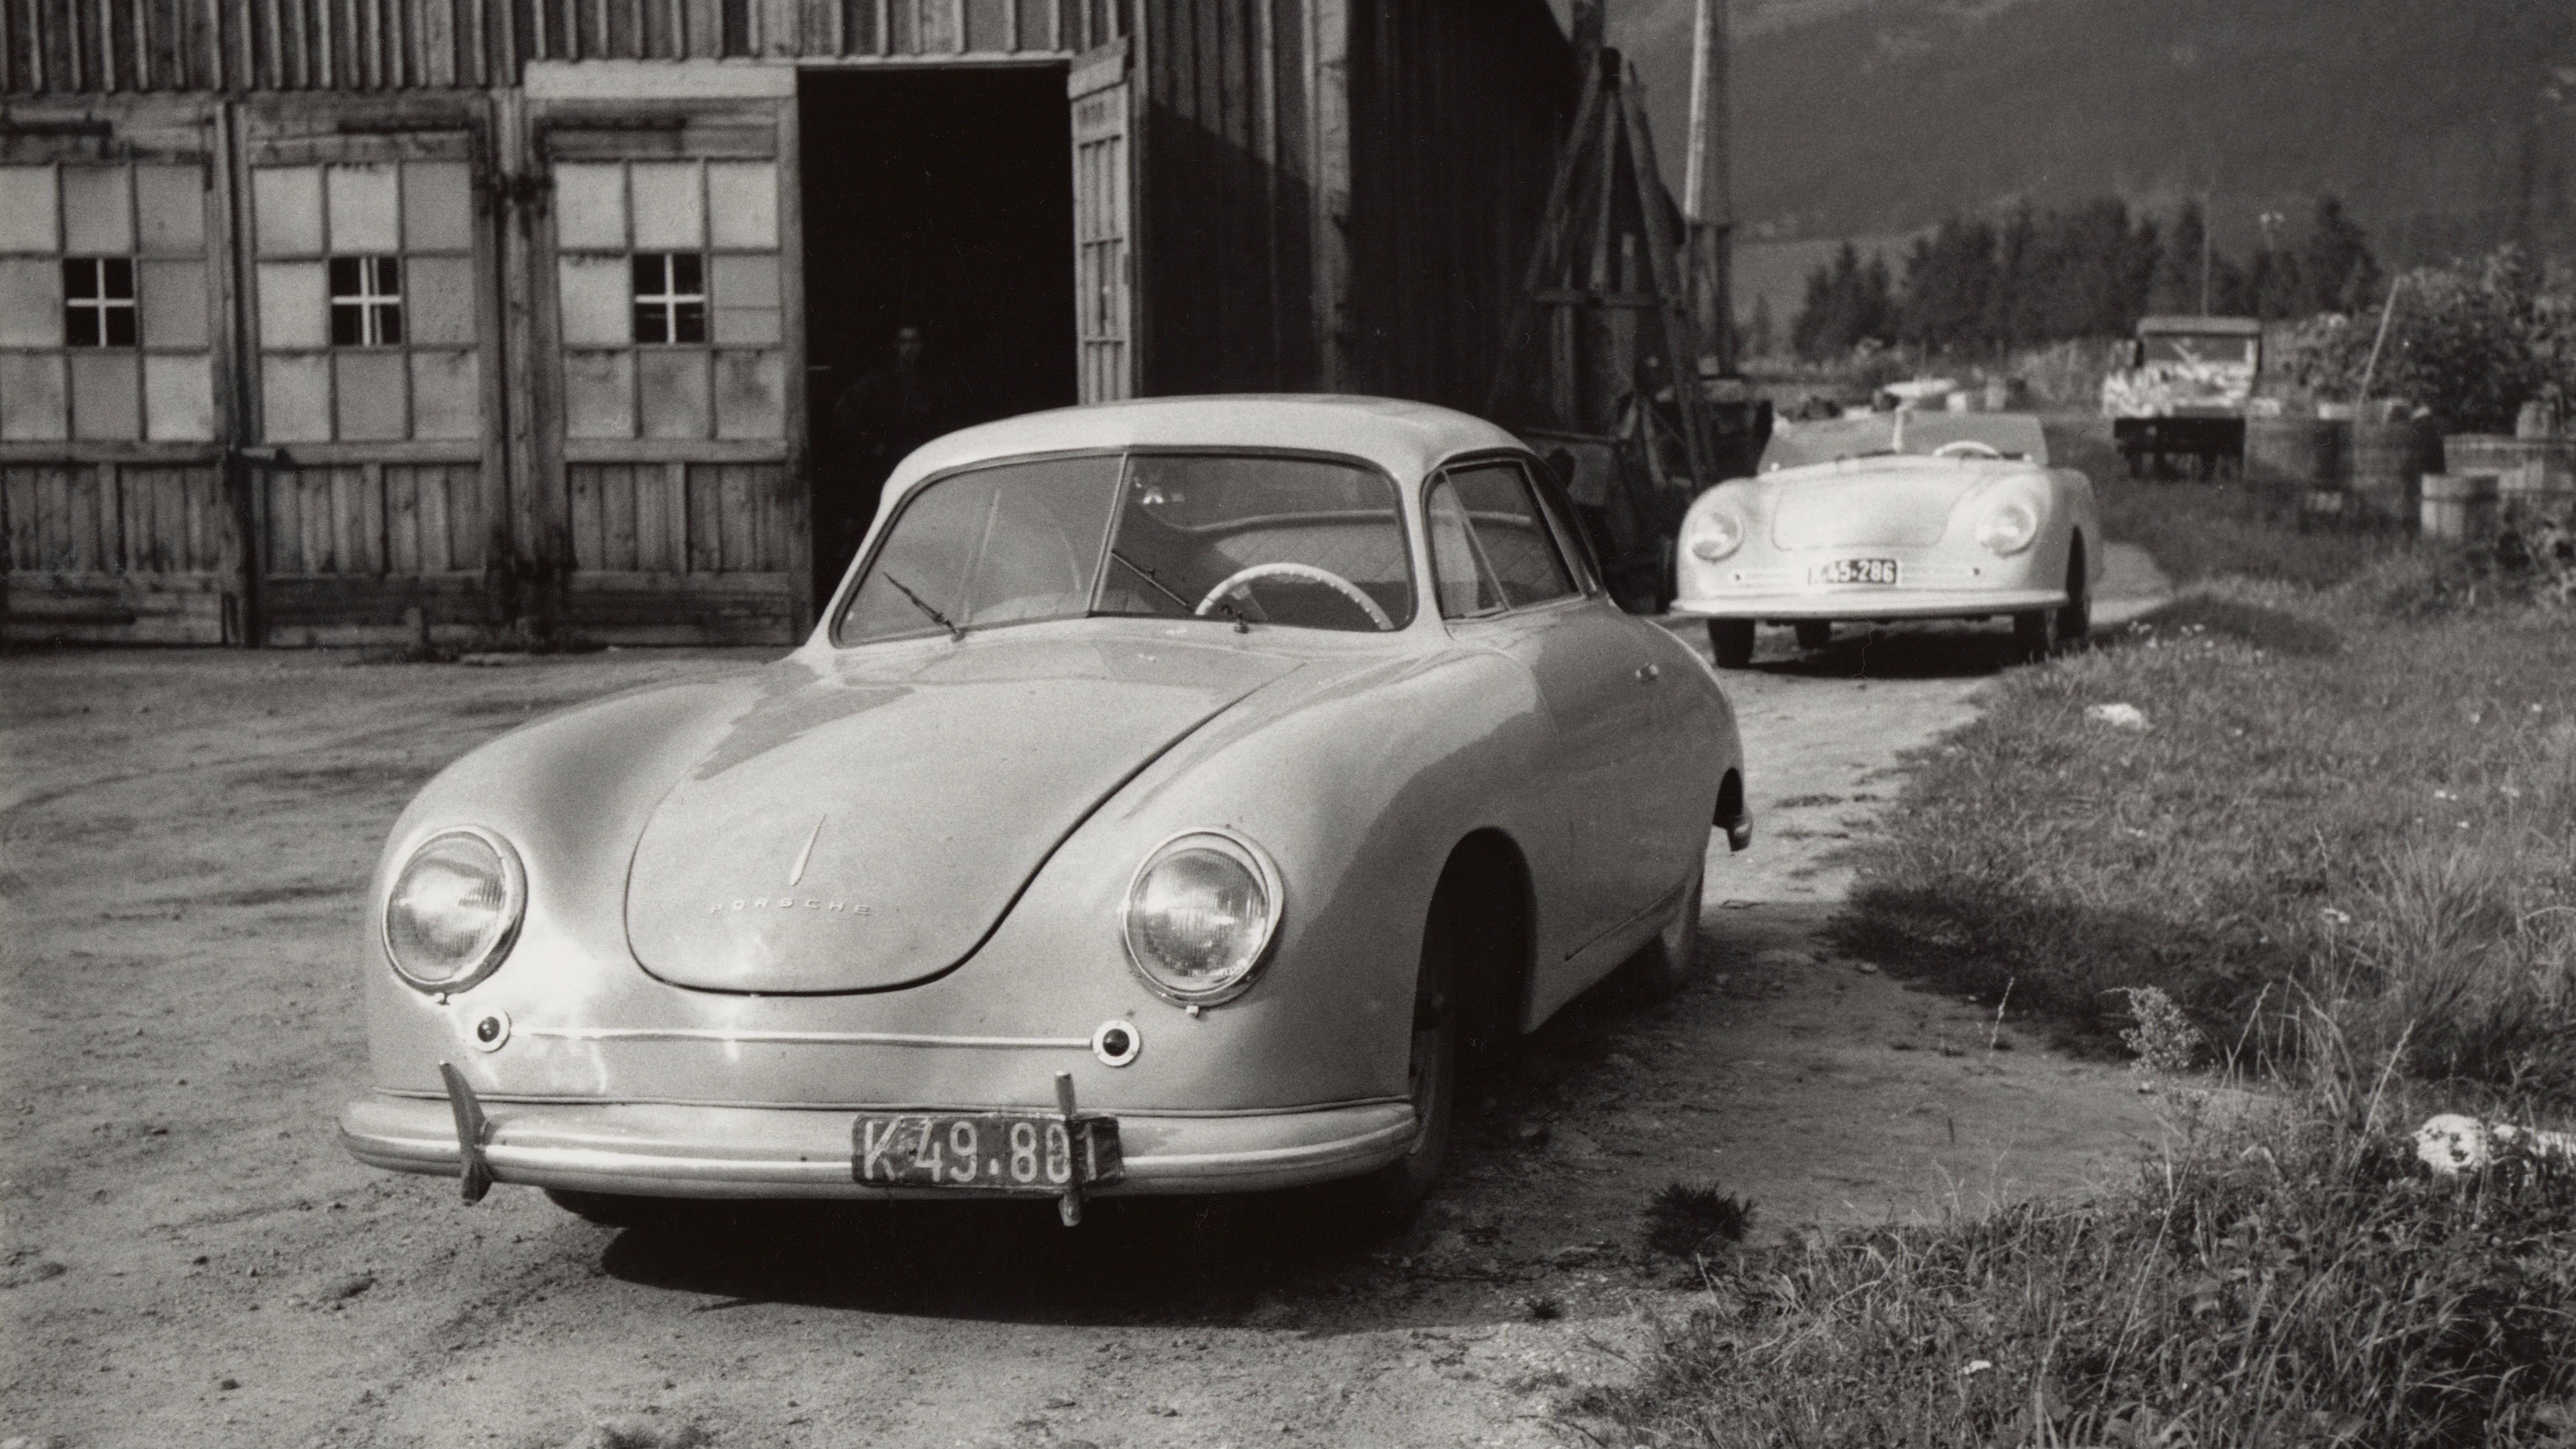 Black and white images of Porsche 356 Coupé and Roadster